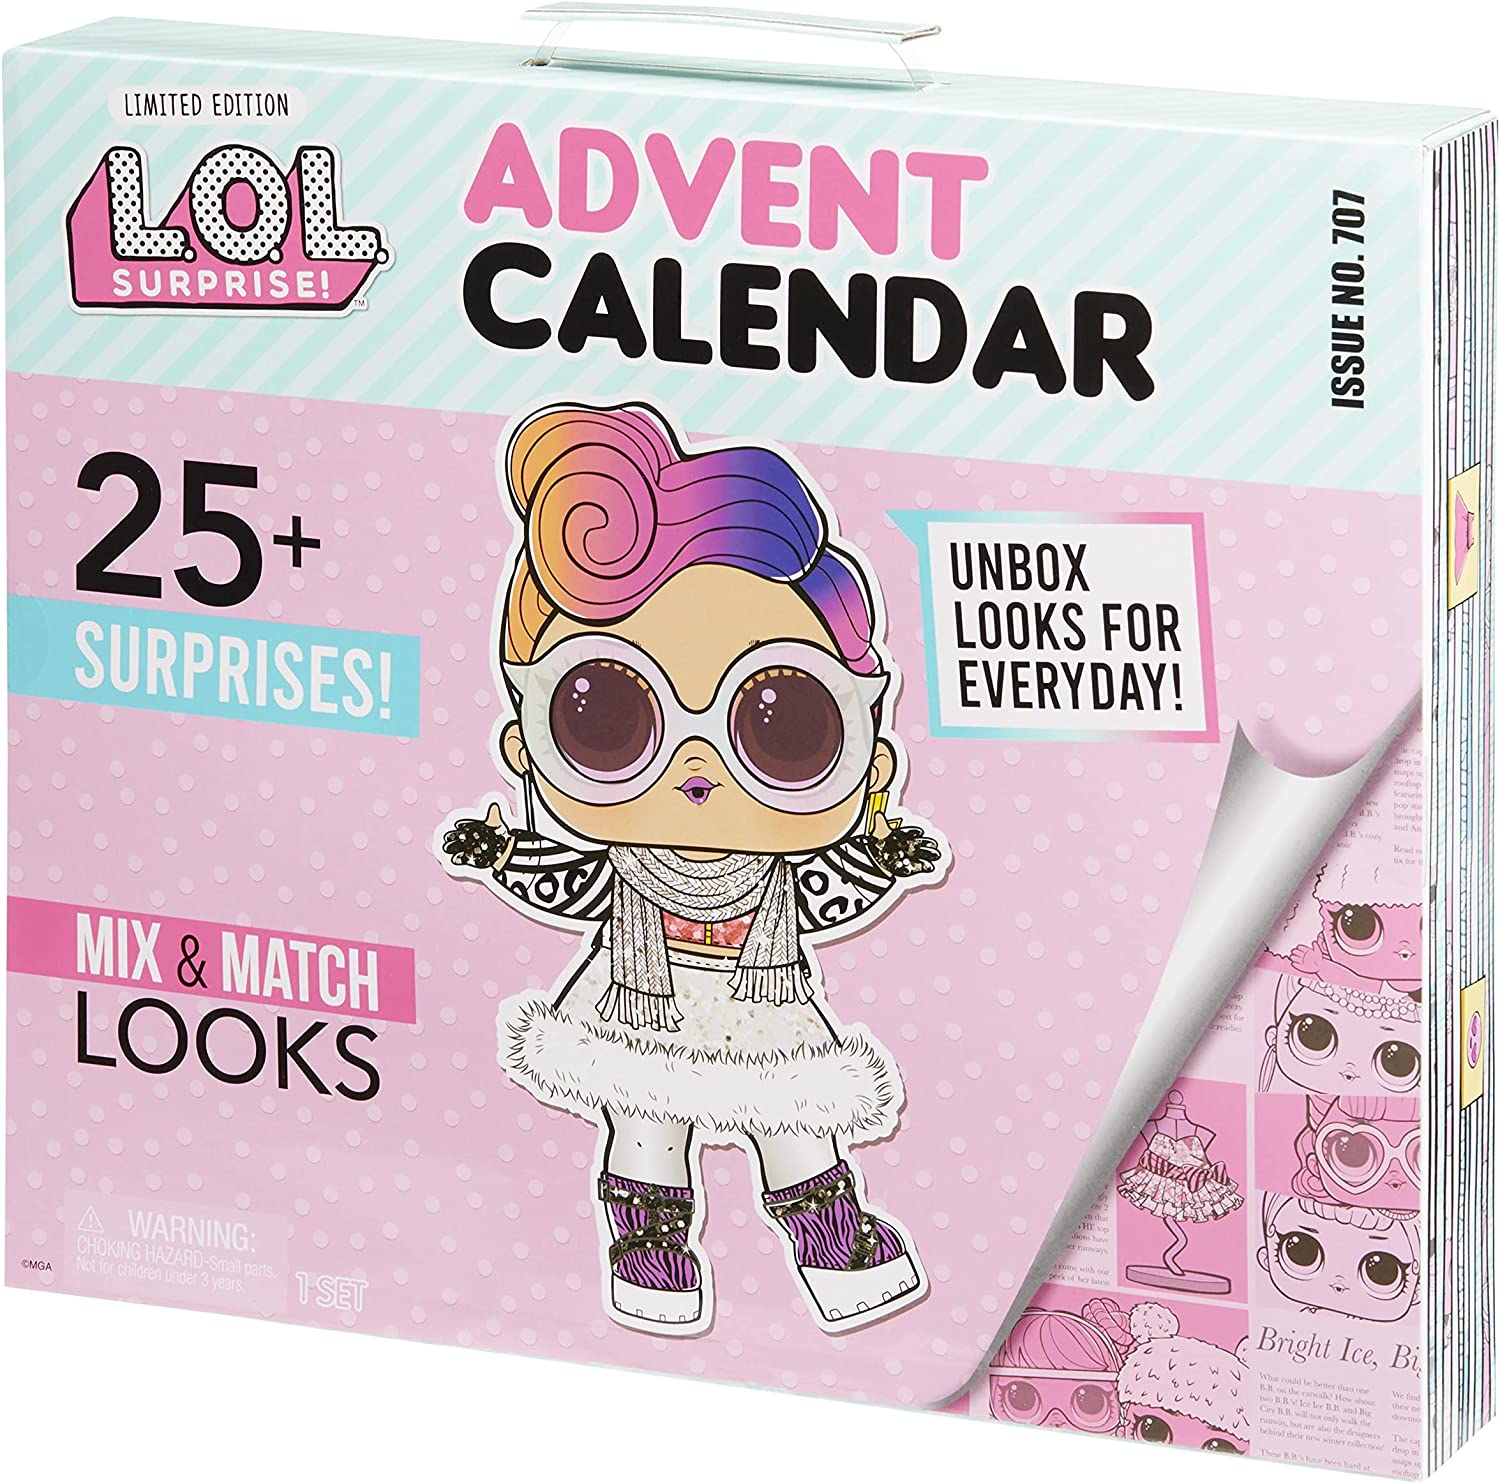 What Is The Correct Way To Open An Advent Calendar 1luxe1